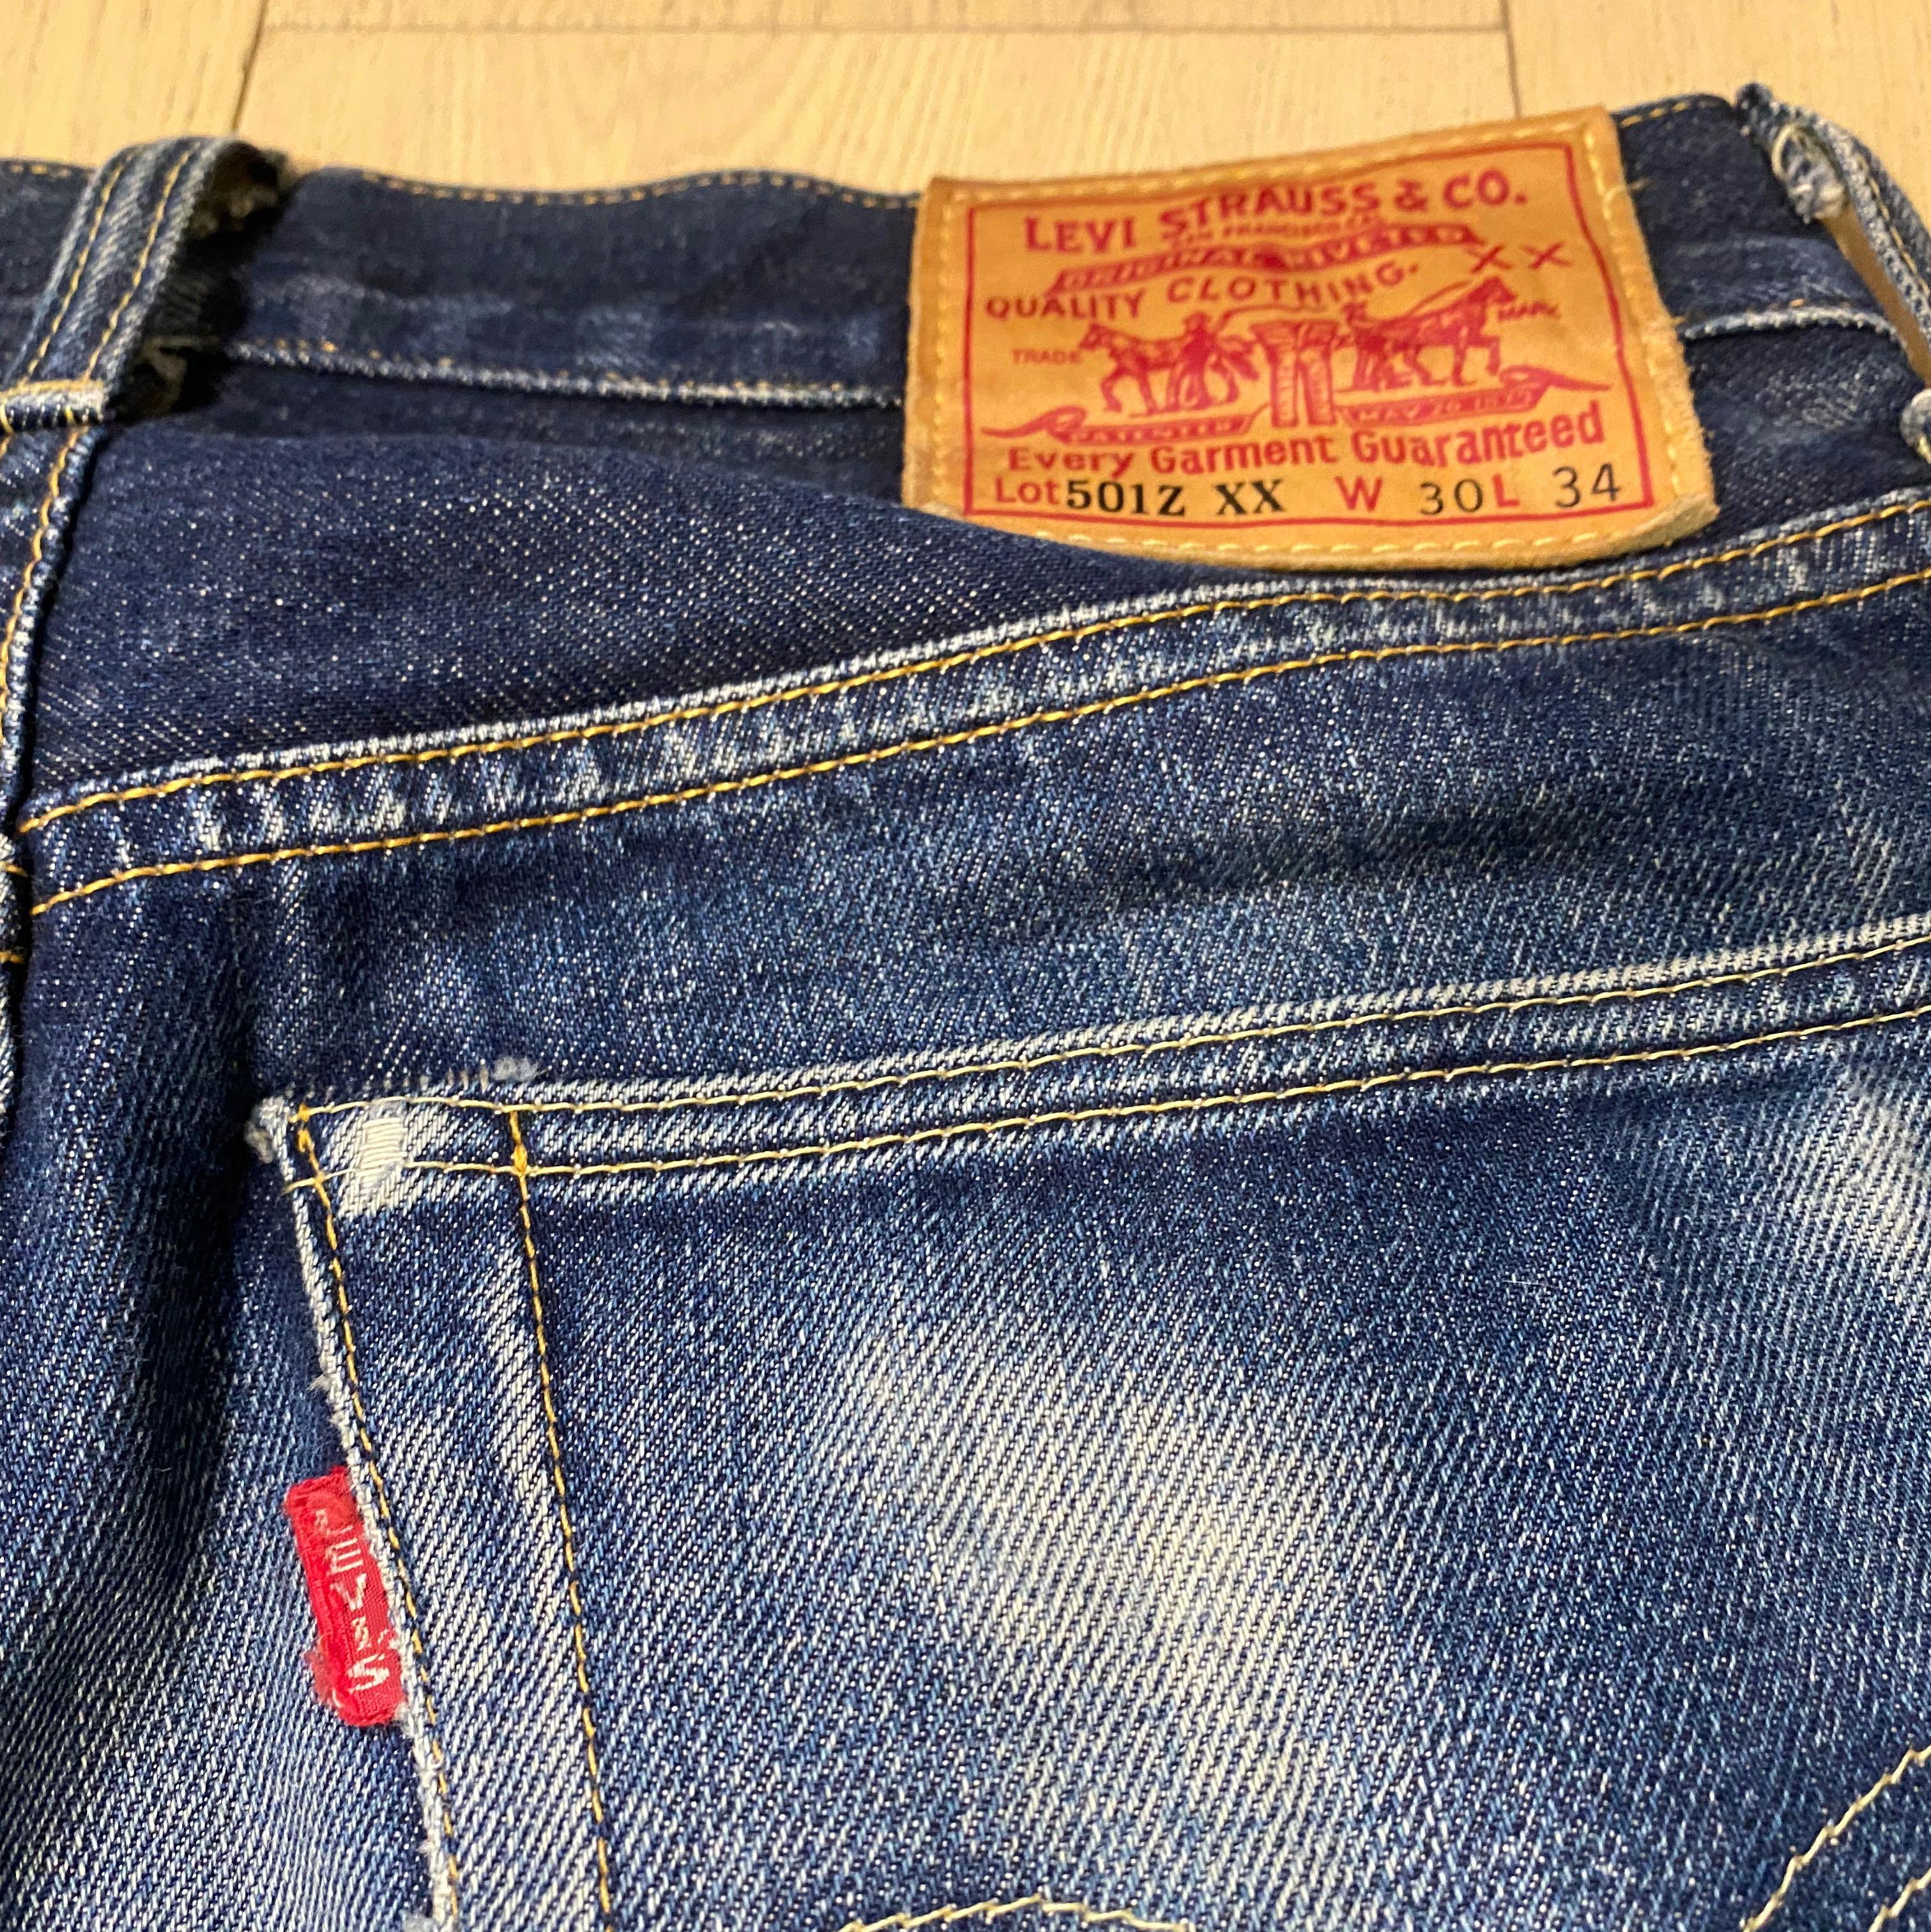 LVC Levi's vintage clothing 1954 501Z XX made in US 色落層次分明 